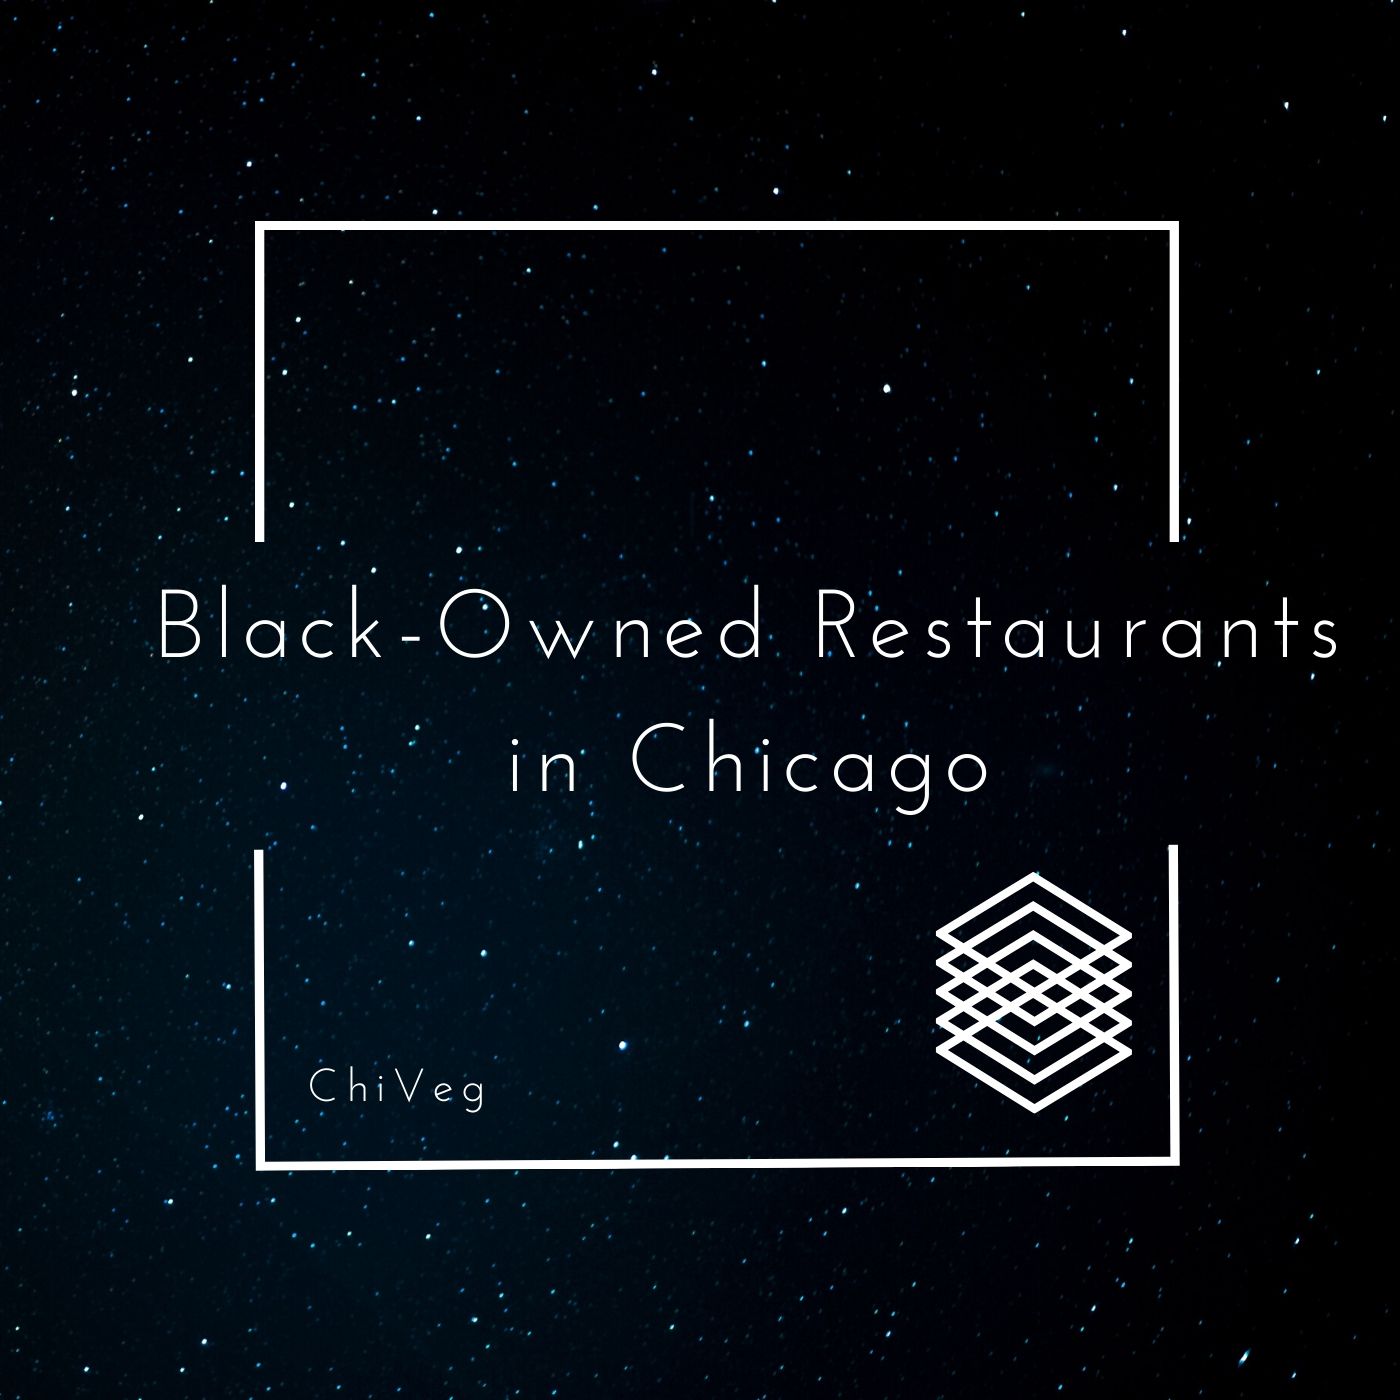 Black-Owned Restaurants in Chicago from ChiVeg made through Canvas